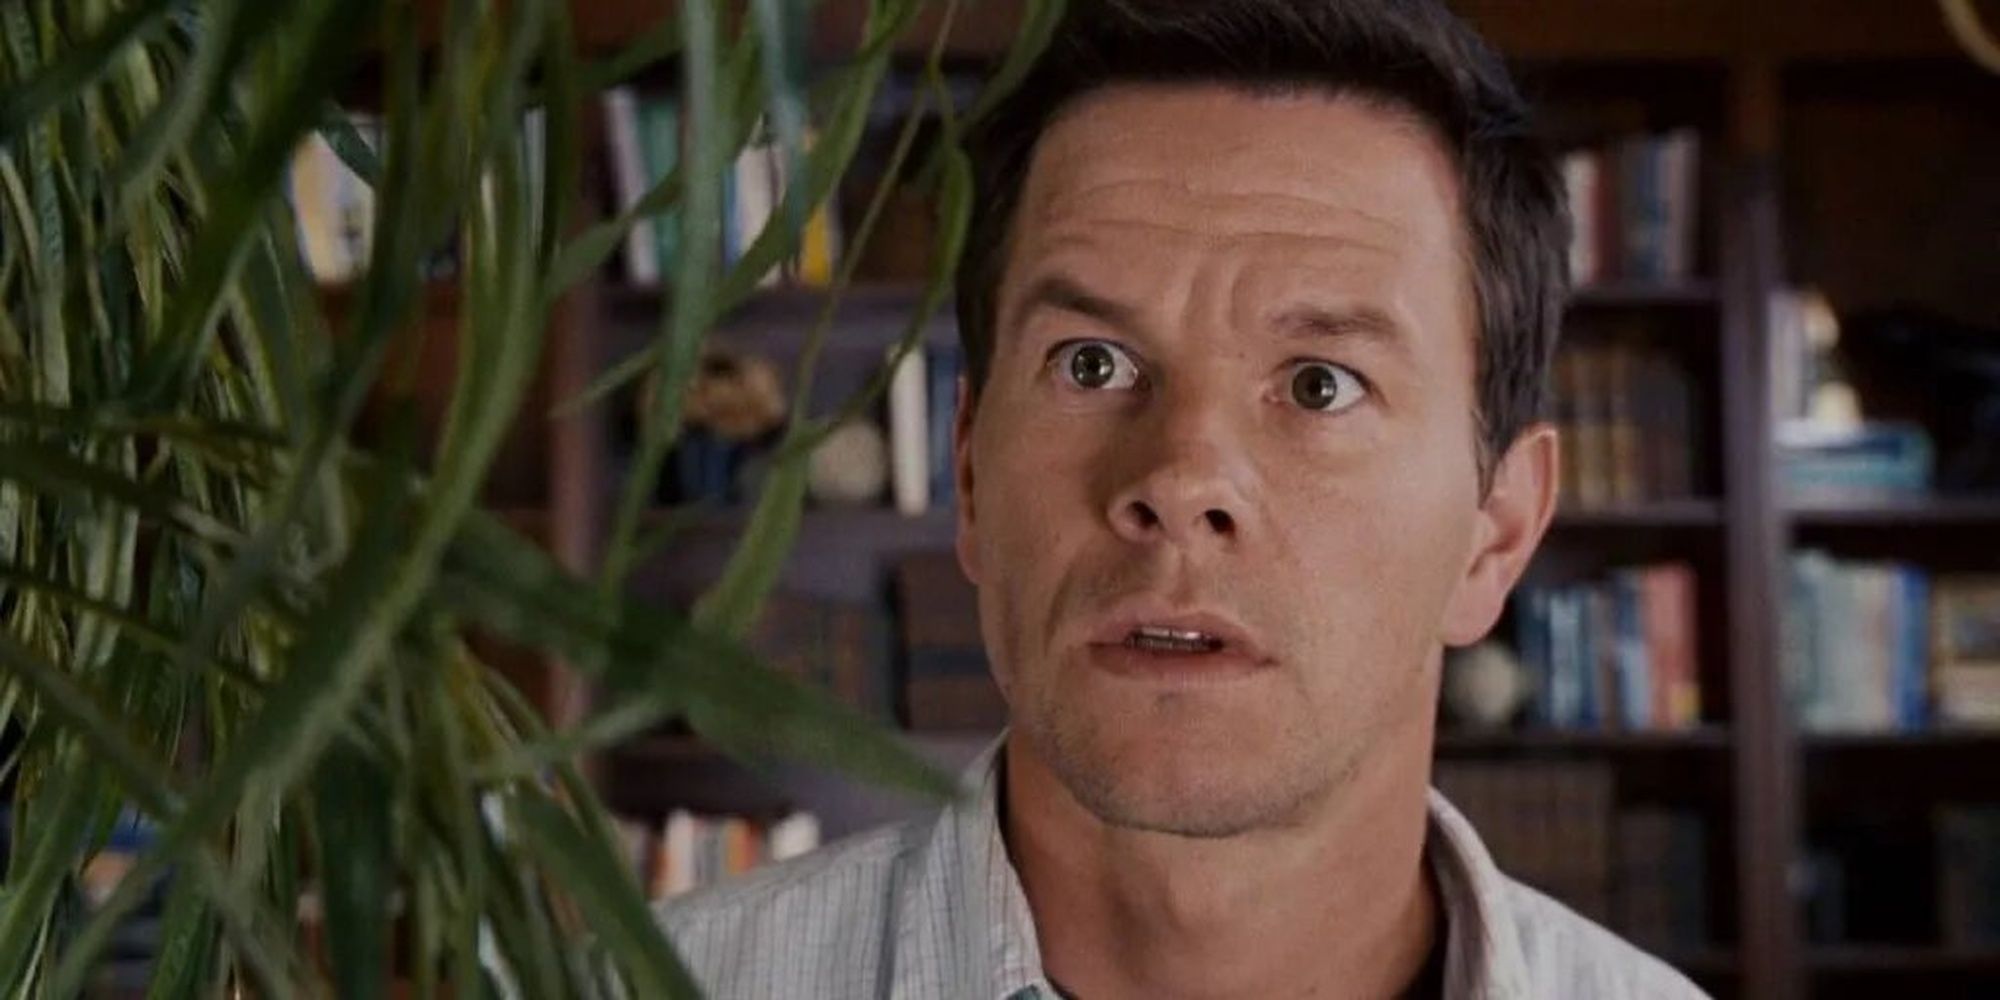 Elliot, played by Mark Wahlberg, looks concerned while talking to a house plant